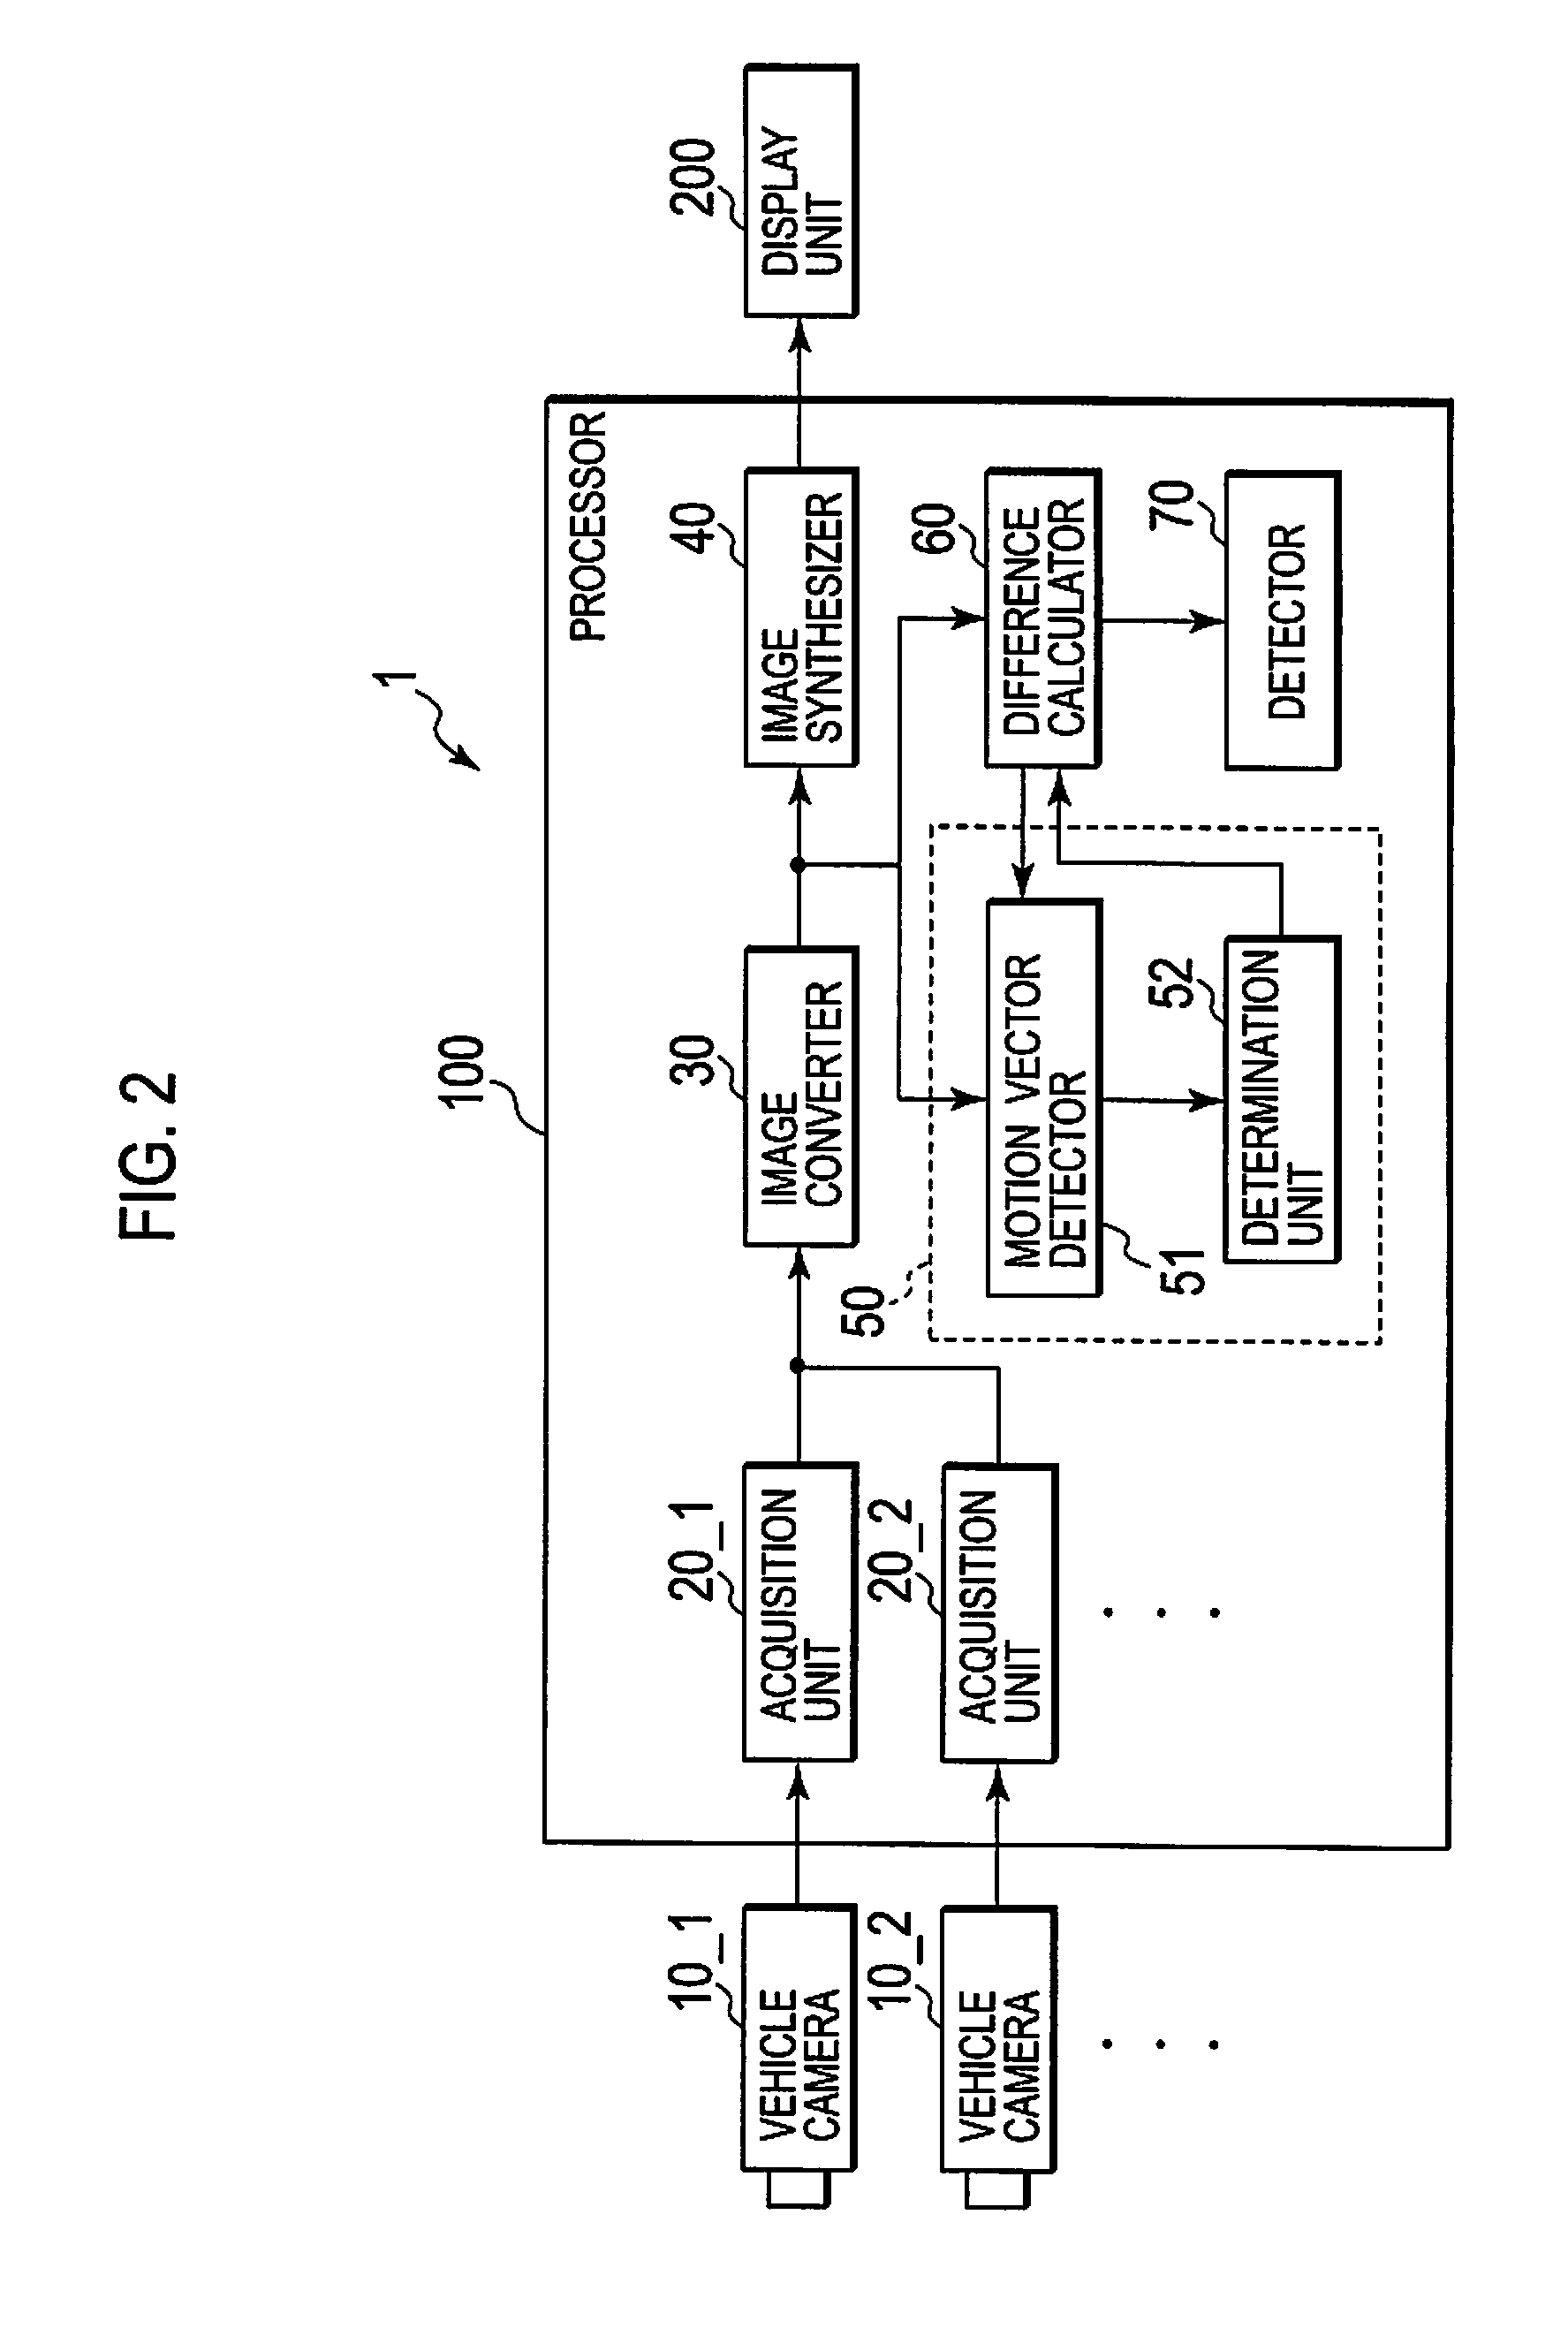 Image processor, driving assistance system, and out-of-position detecting method